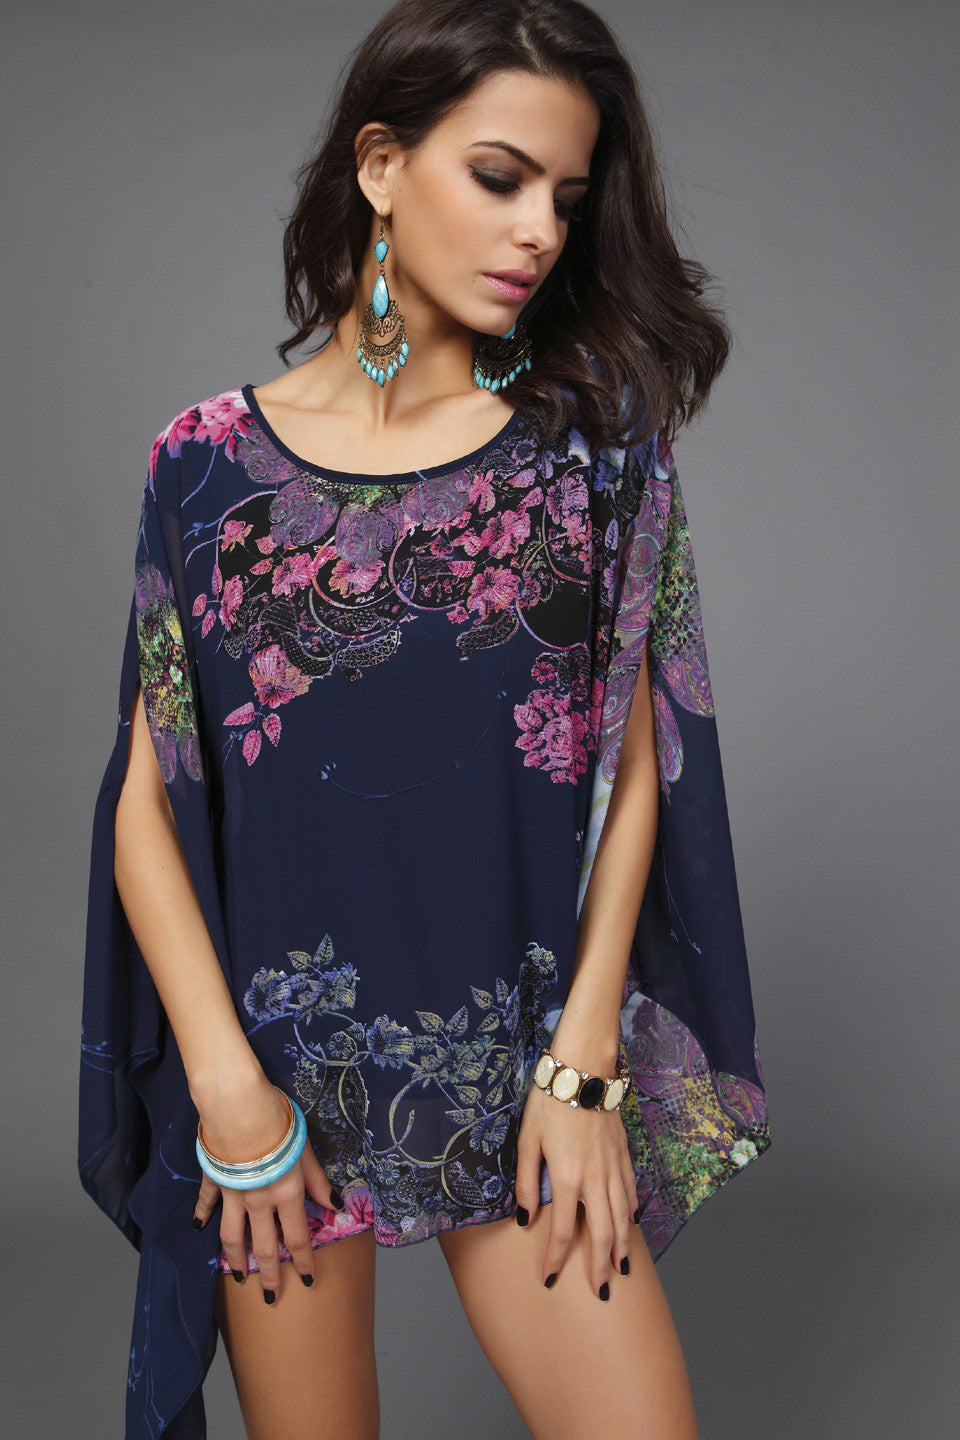 Beautiful Chiffon Plus Size Floral Print Batwing-Sleeved Blouse - Oh Yours Fashion - 1